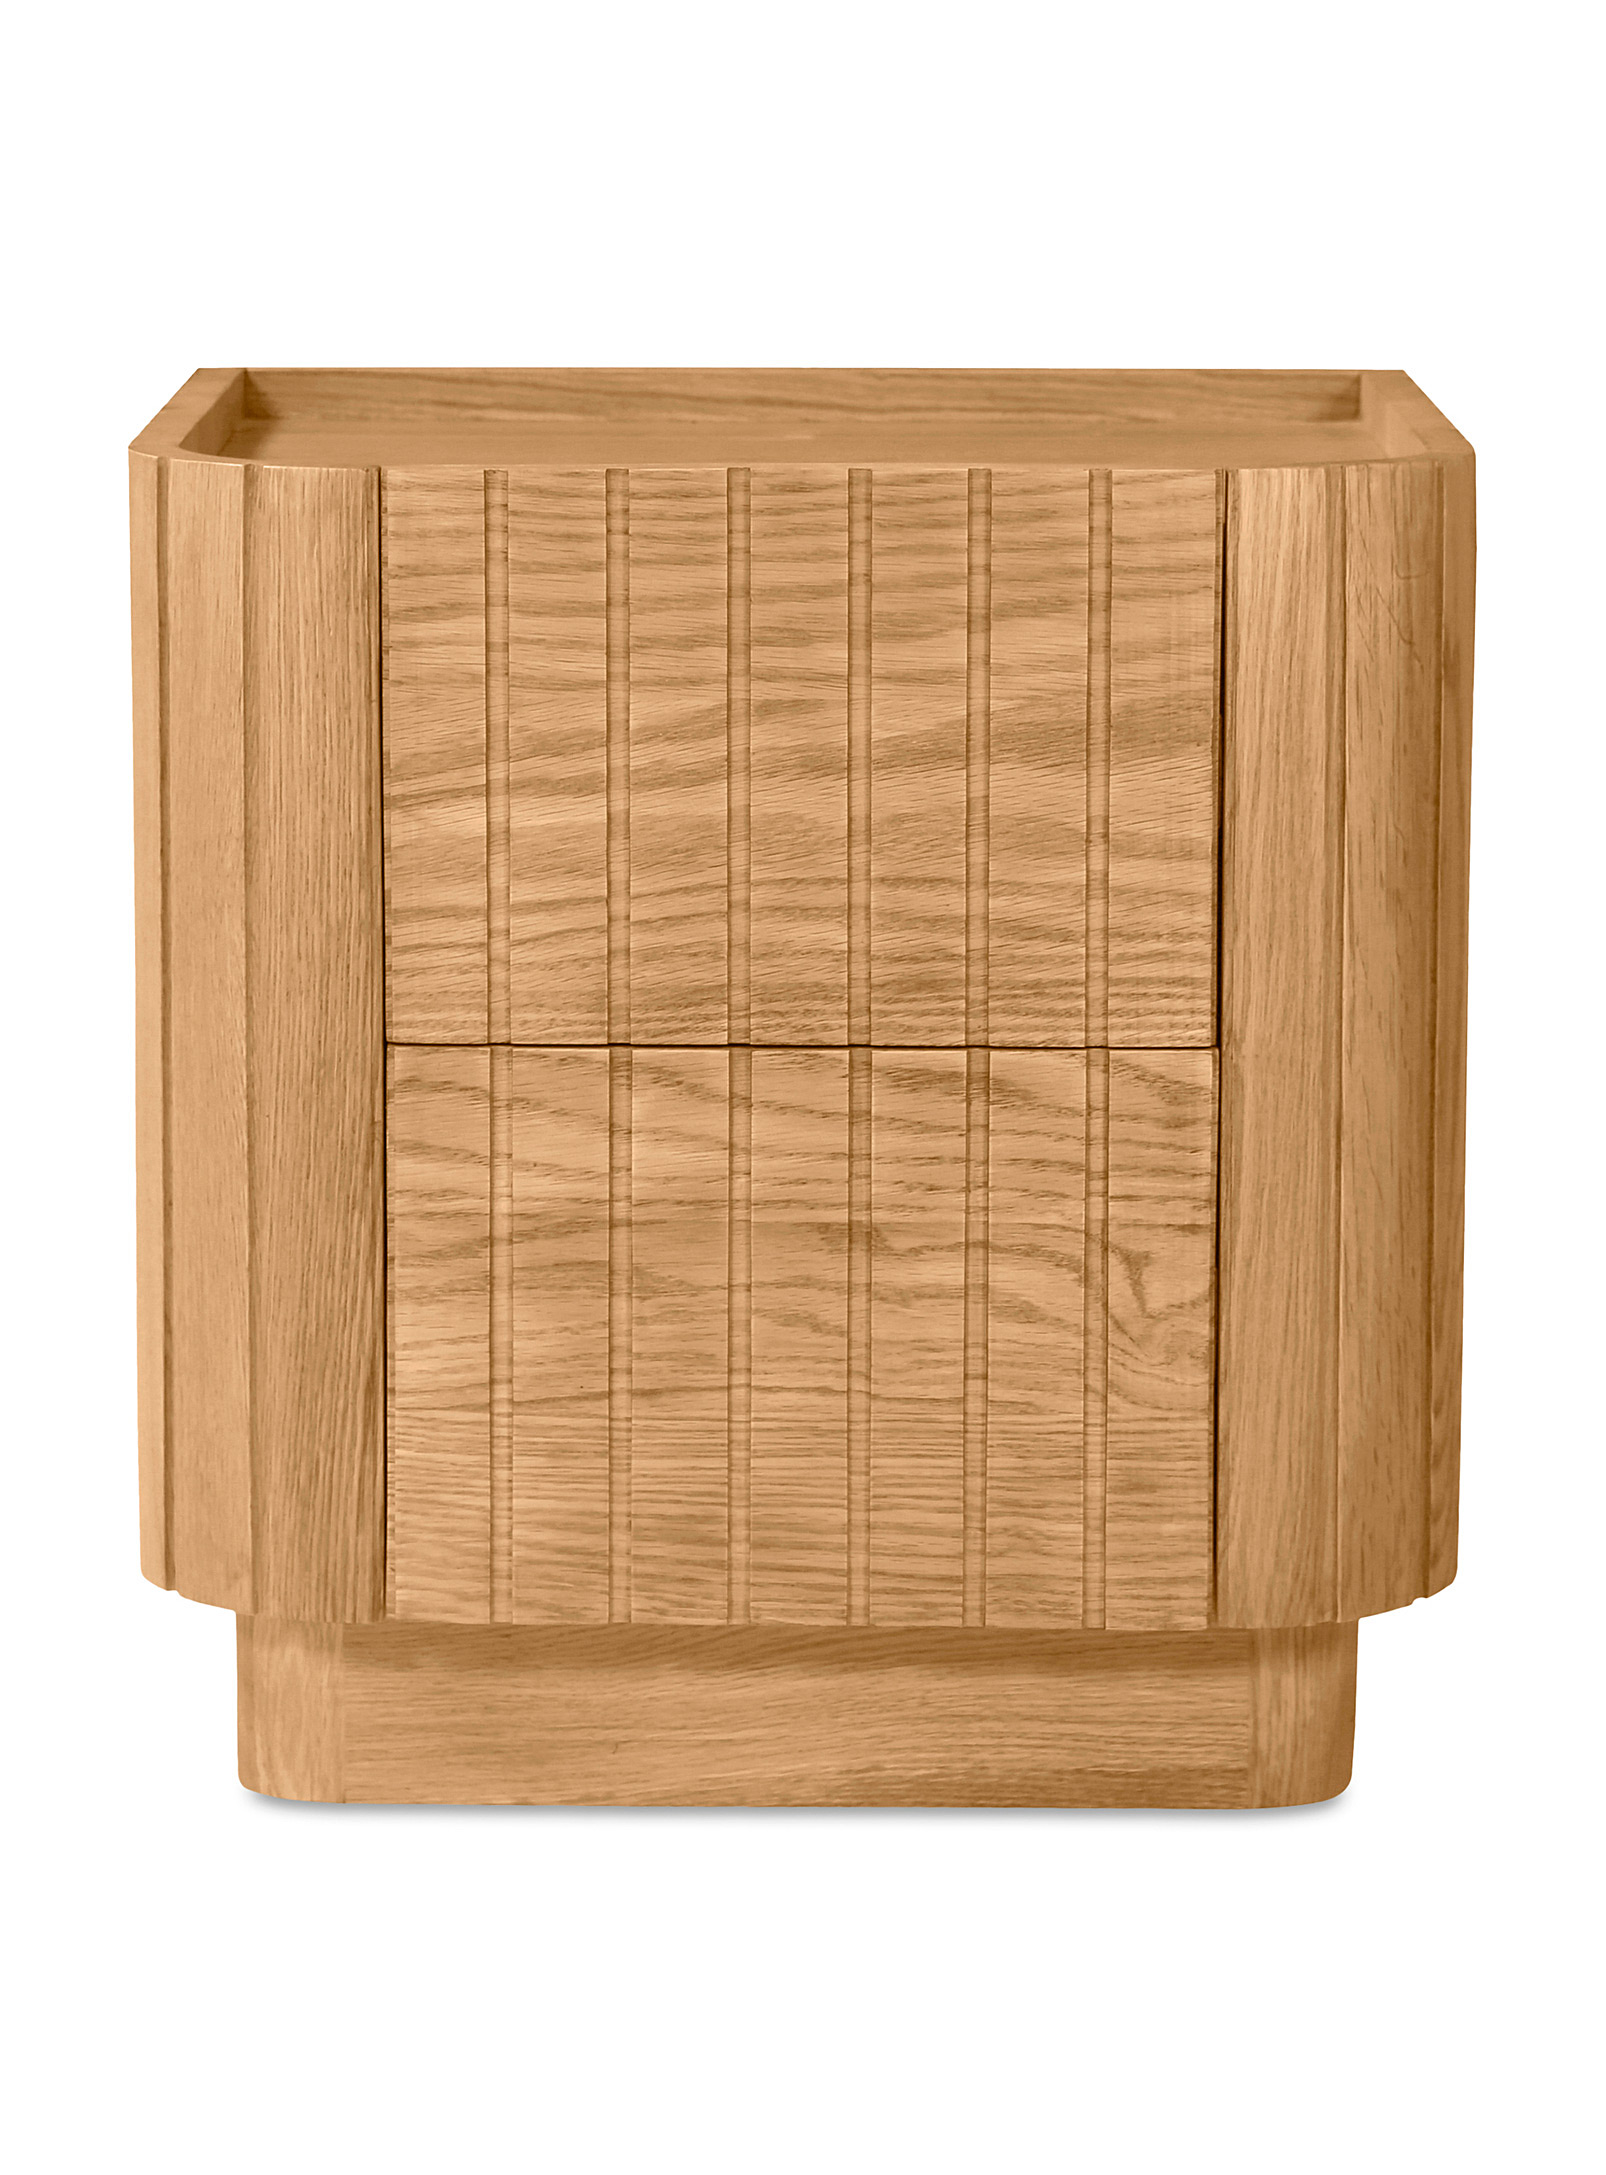 Moe's Home Collection - Povera grooved oak bedside table